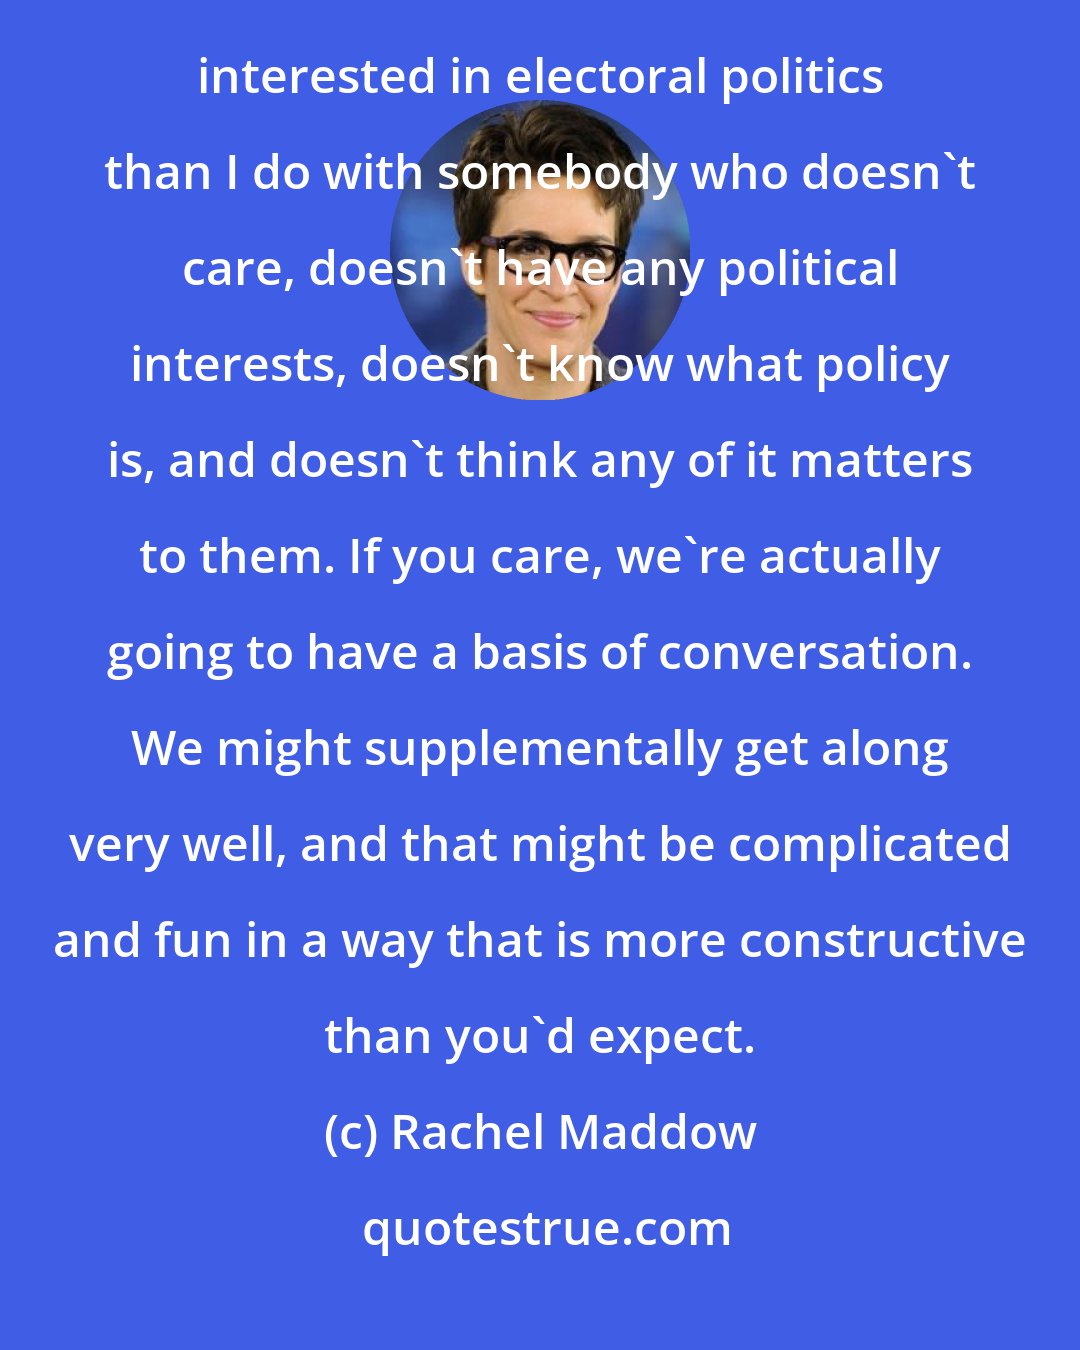 Rachel Maddow: I feel like I have more in common with conservative people who have activist causes in their hearts and who are interested in electoral politics than I do with somebody who doesn't care, doesn't have any political interests, doesn't know what policy is, and doesn't think any of it matters to them. If you care, we're actually going to have a basis of conversation. We might supplementally get along very well, and that might be complicated and fun in a way that is more constructive than you'd expect.